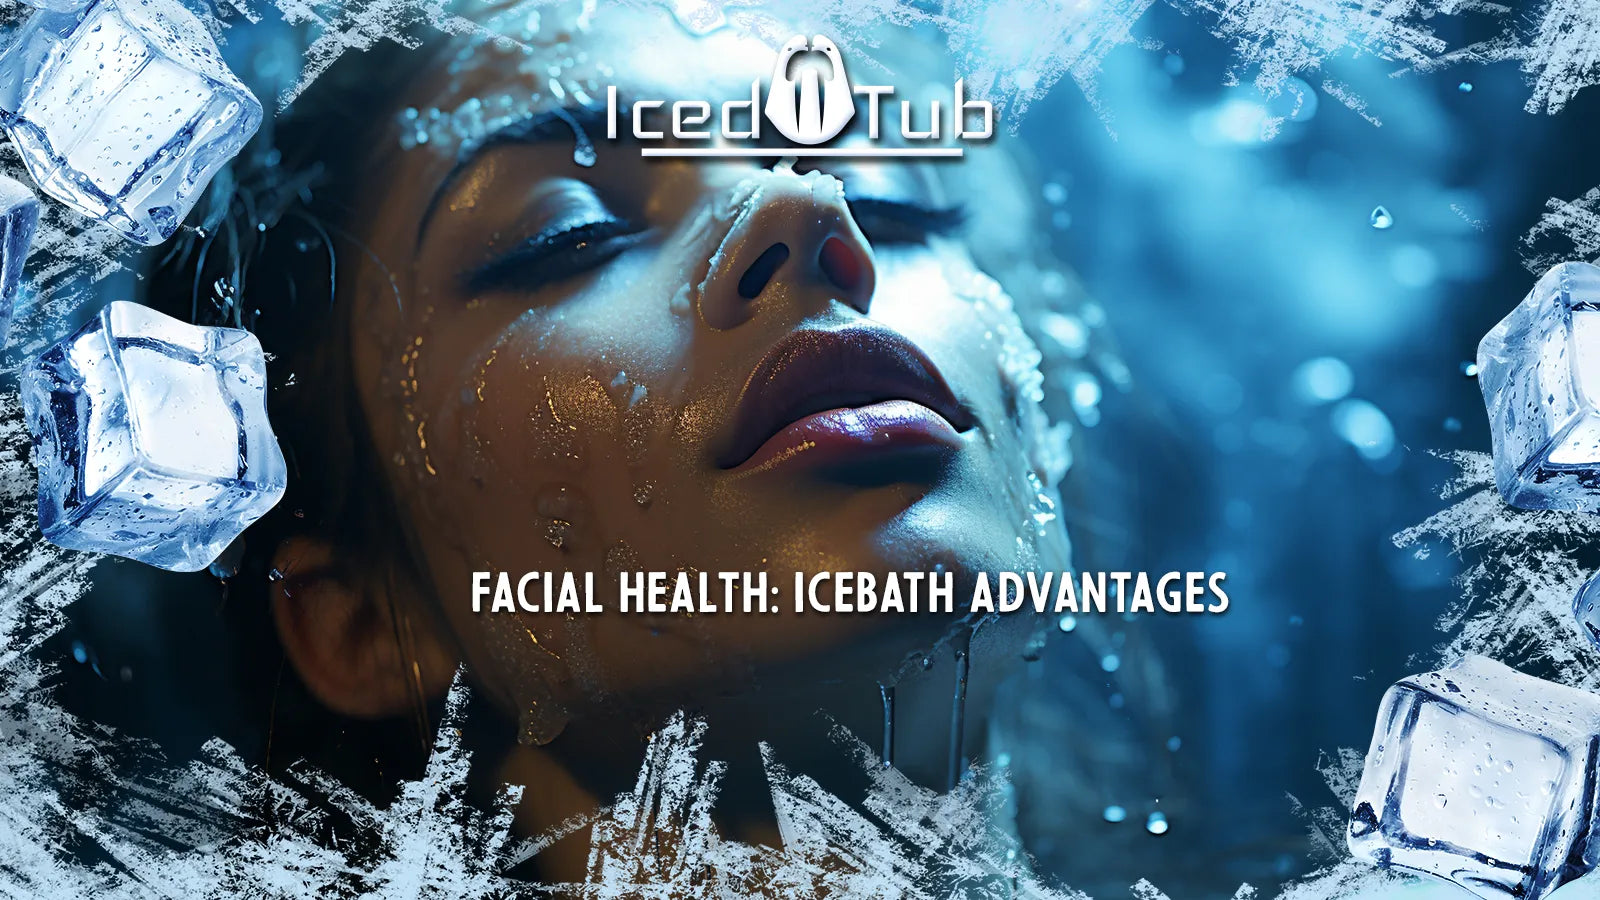 Specific Advantages of Ice Baths for Facial Health